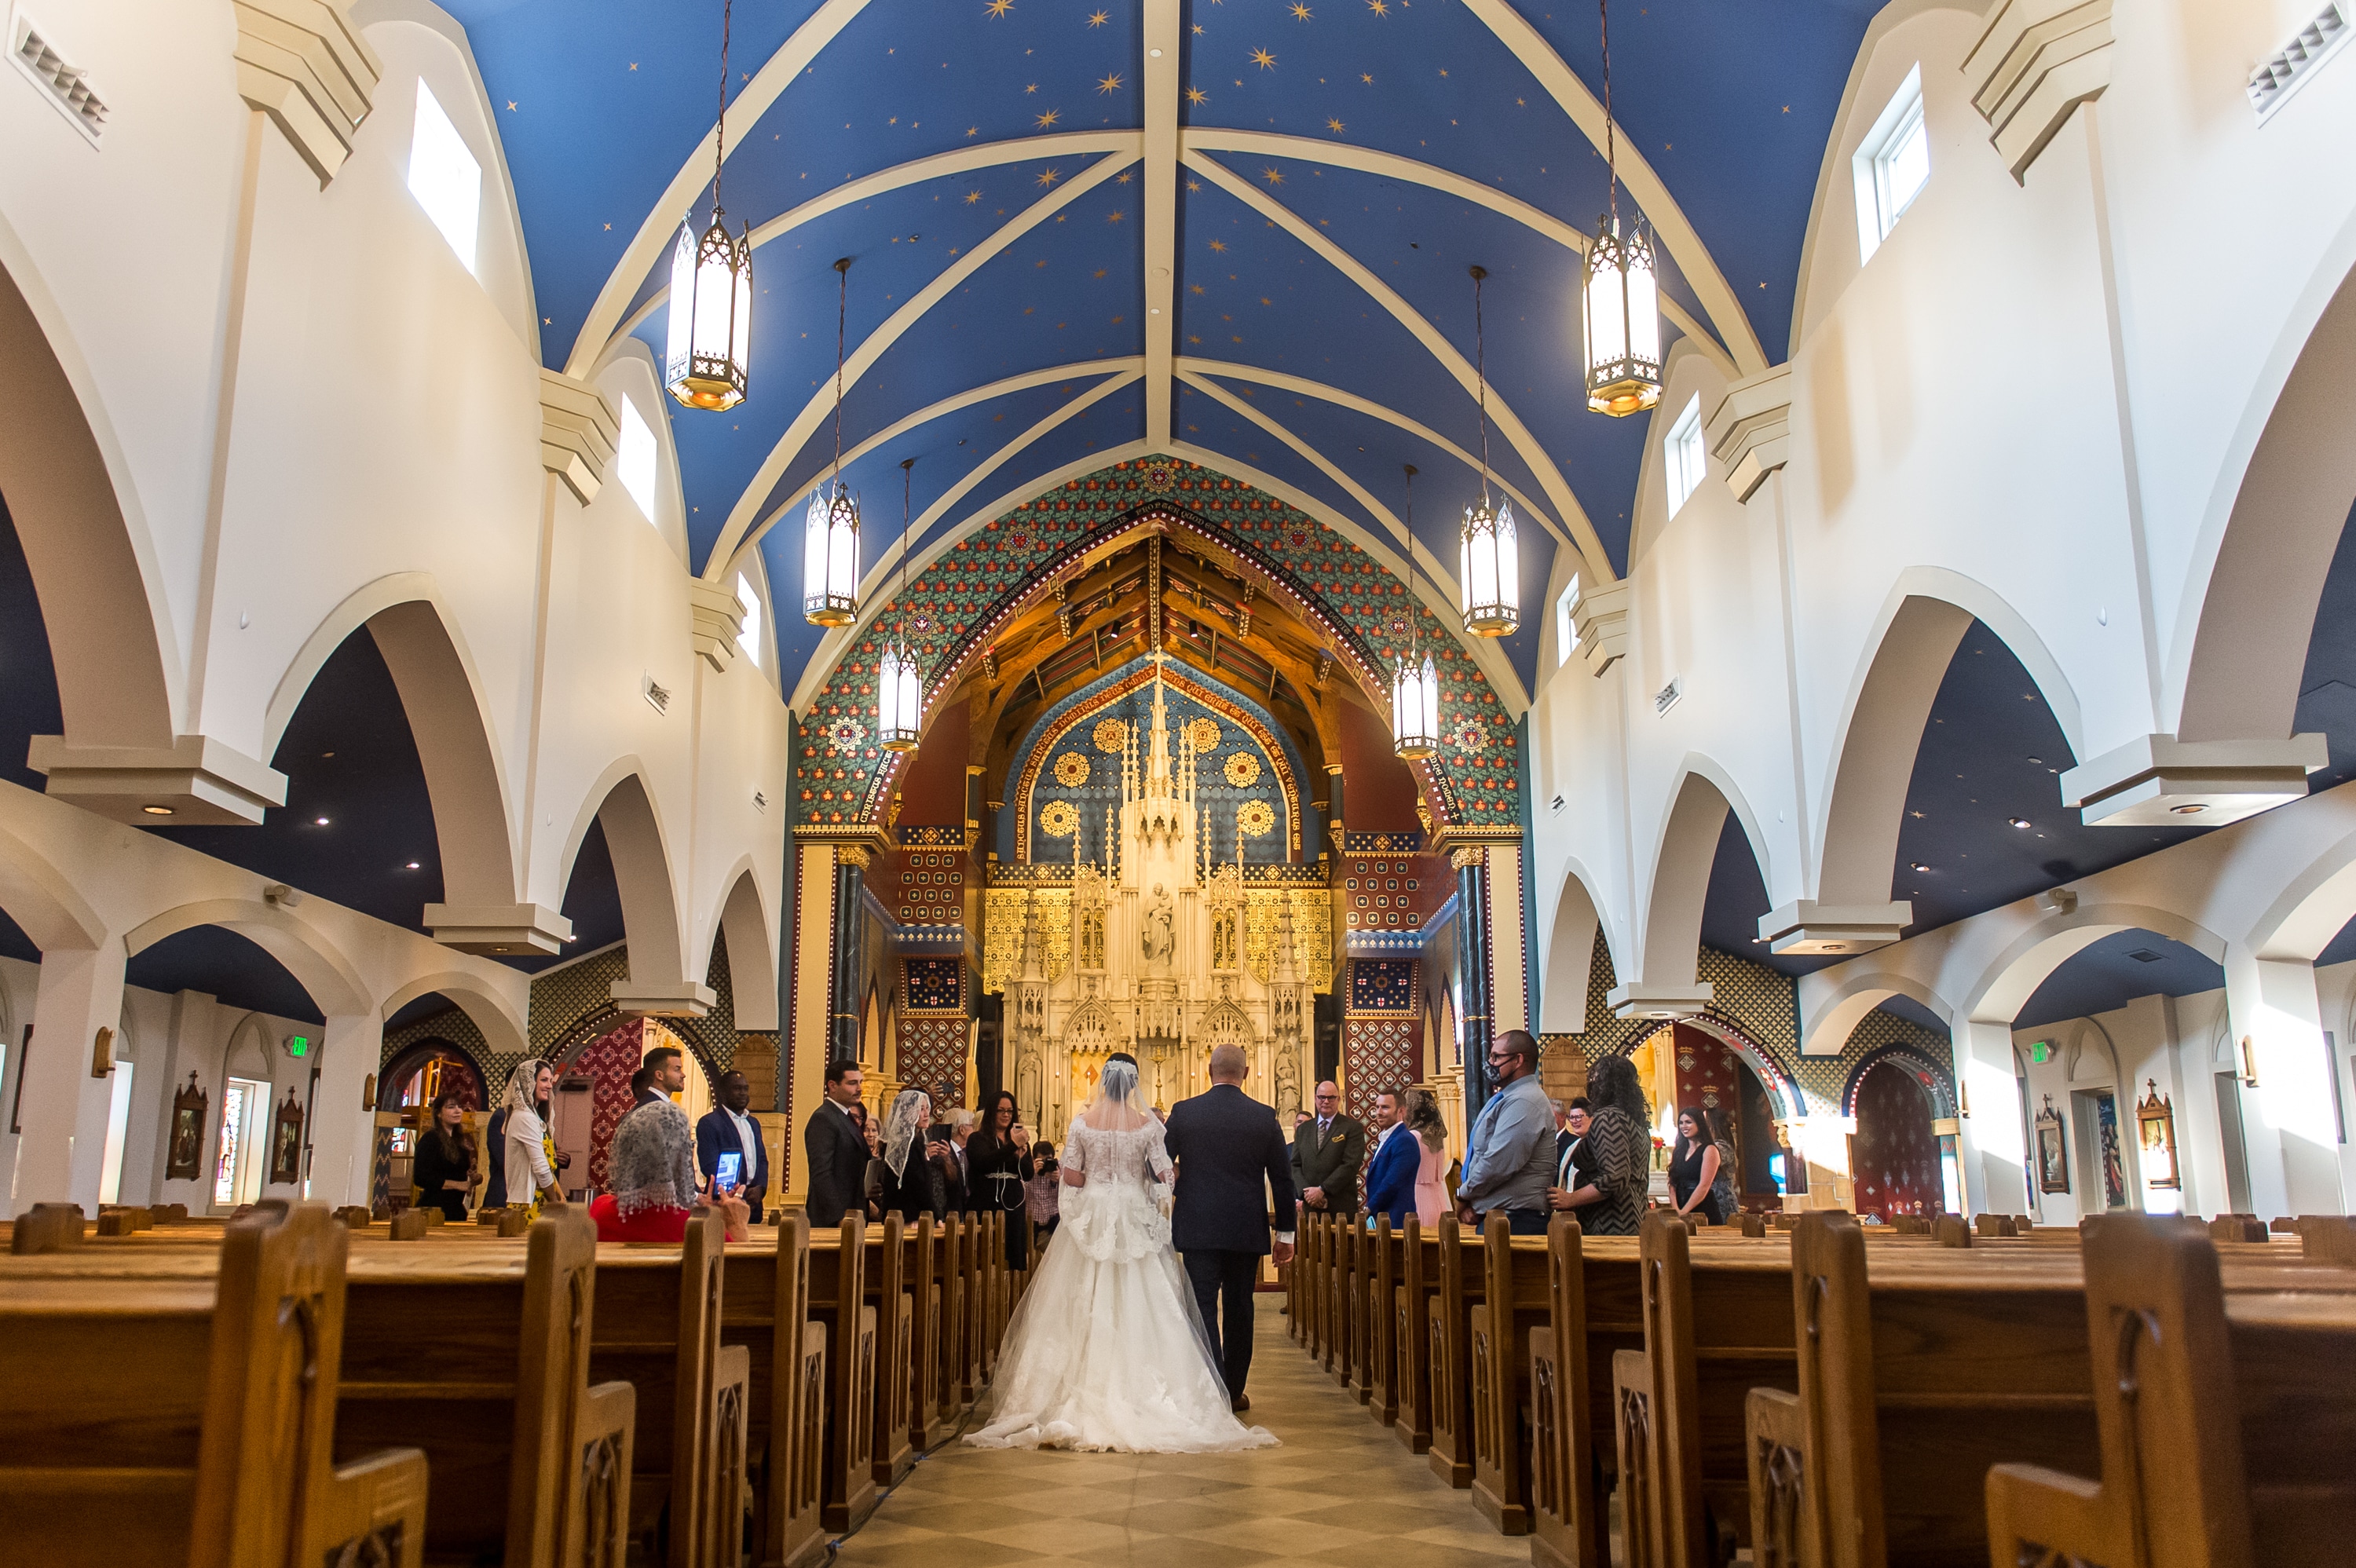 Bride walks down the aisle with her father during a wedding at Our Lady of Mt. Carmel in Littleton, Colorado.